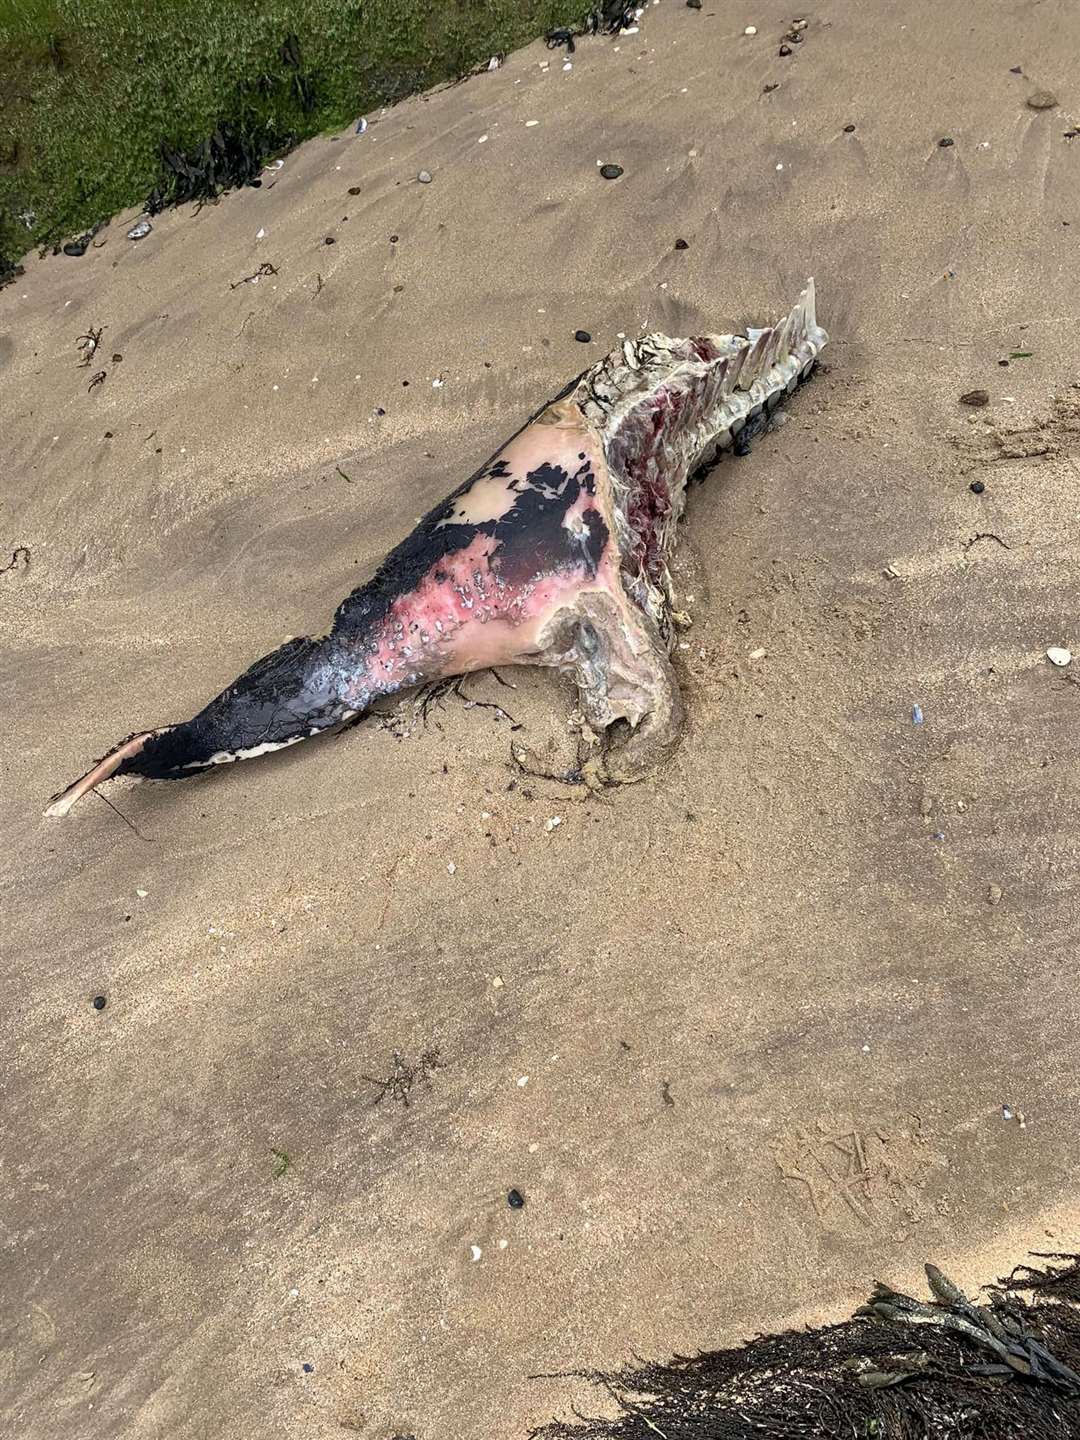 What appears to be a dead porpoise